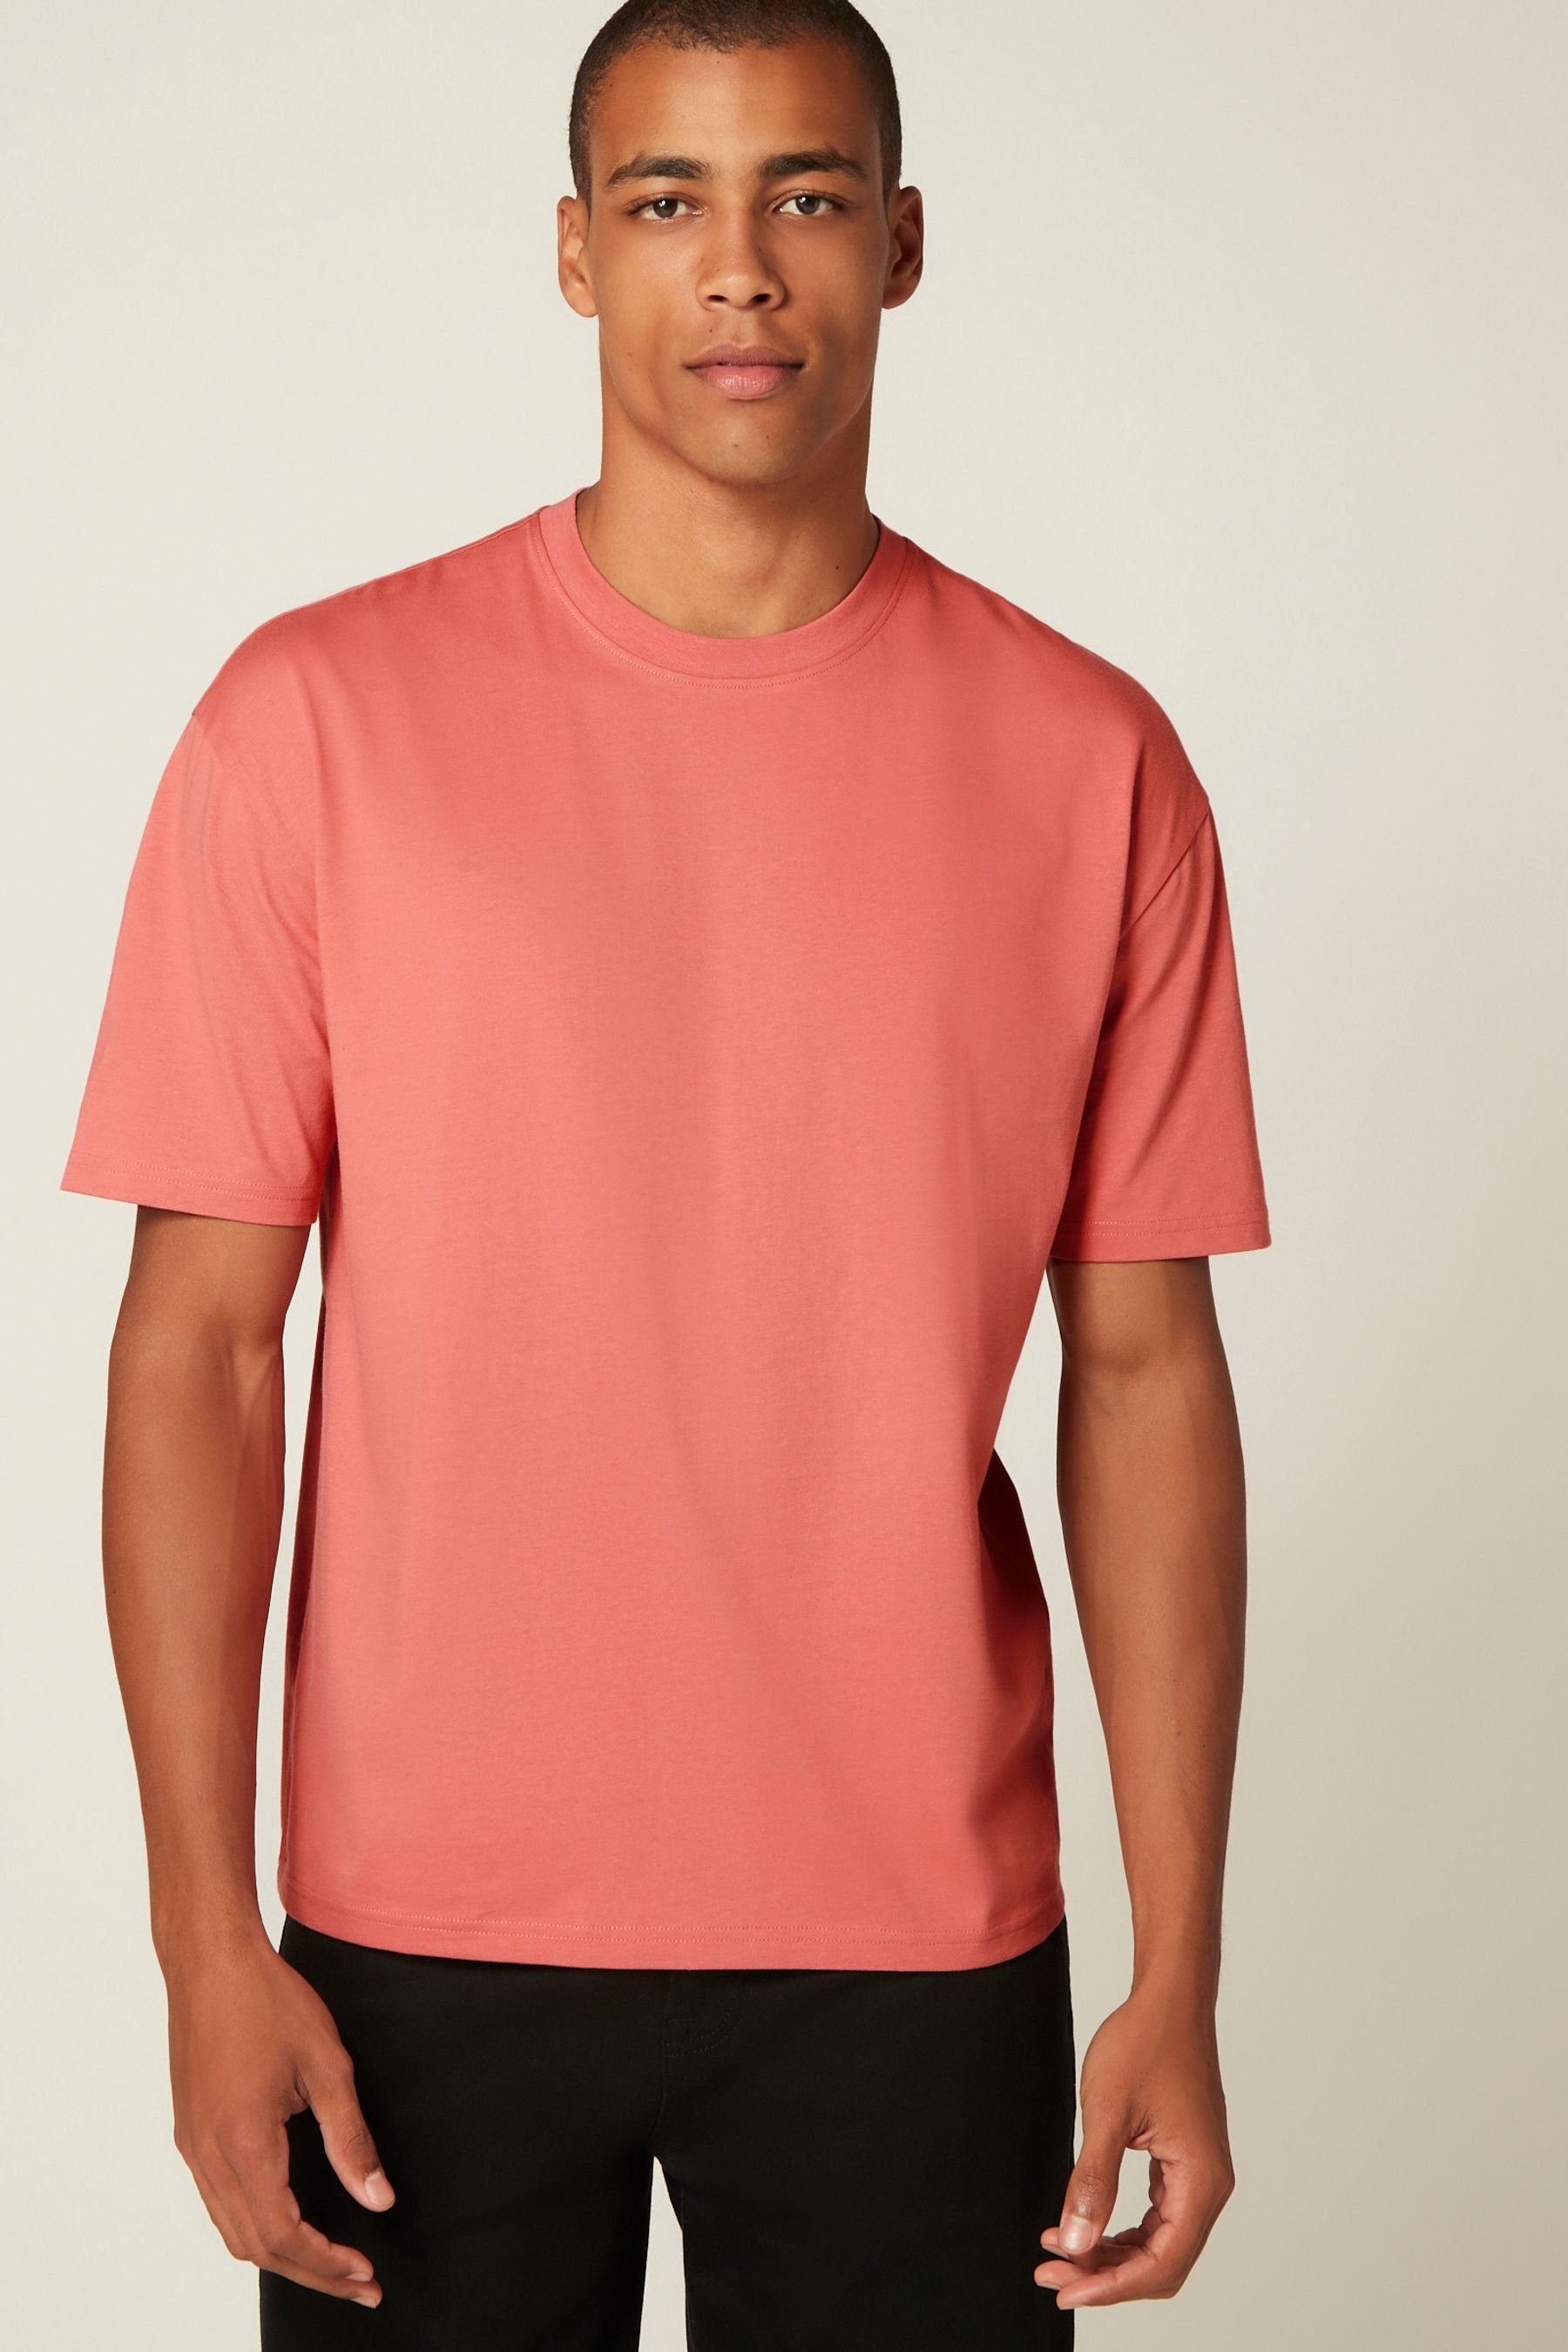 Relaxed Next Pink Rundhals-T-Shirt (1-tlg) im Fit Coral T-Shirt